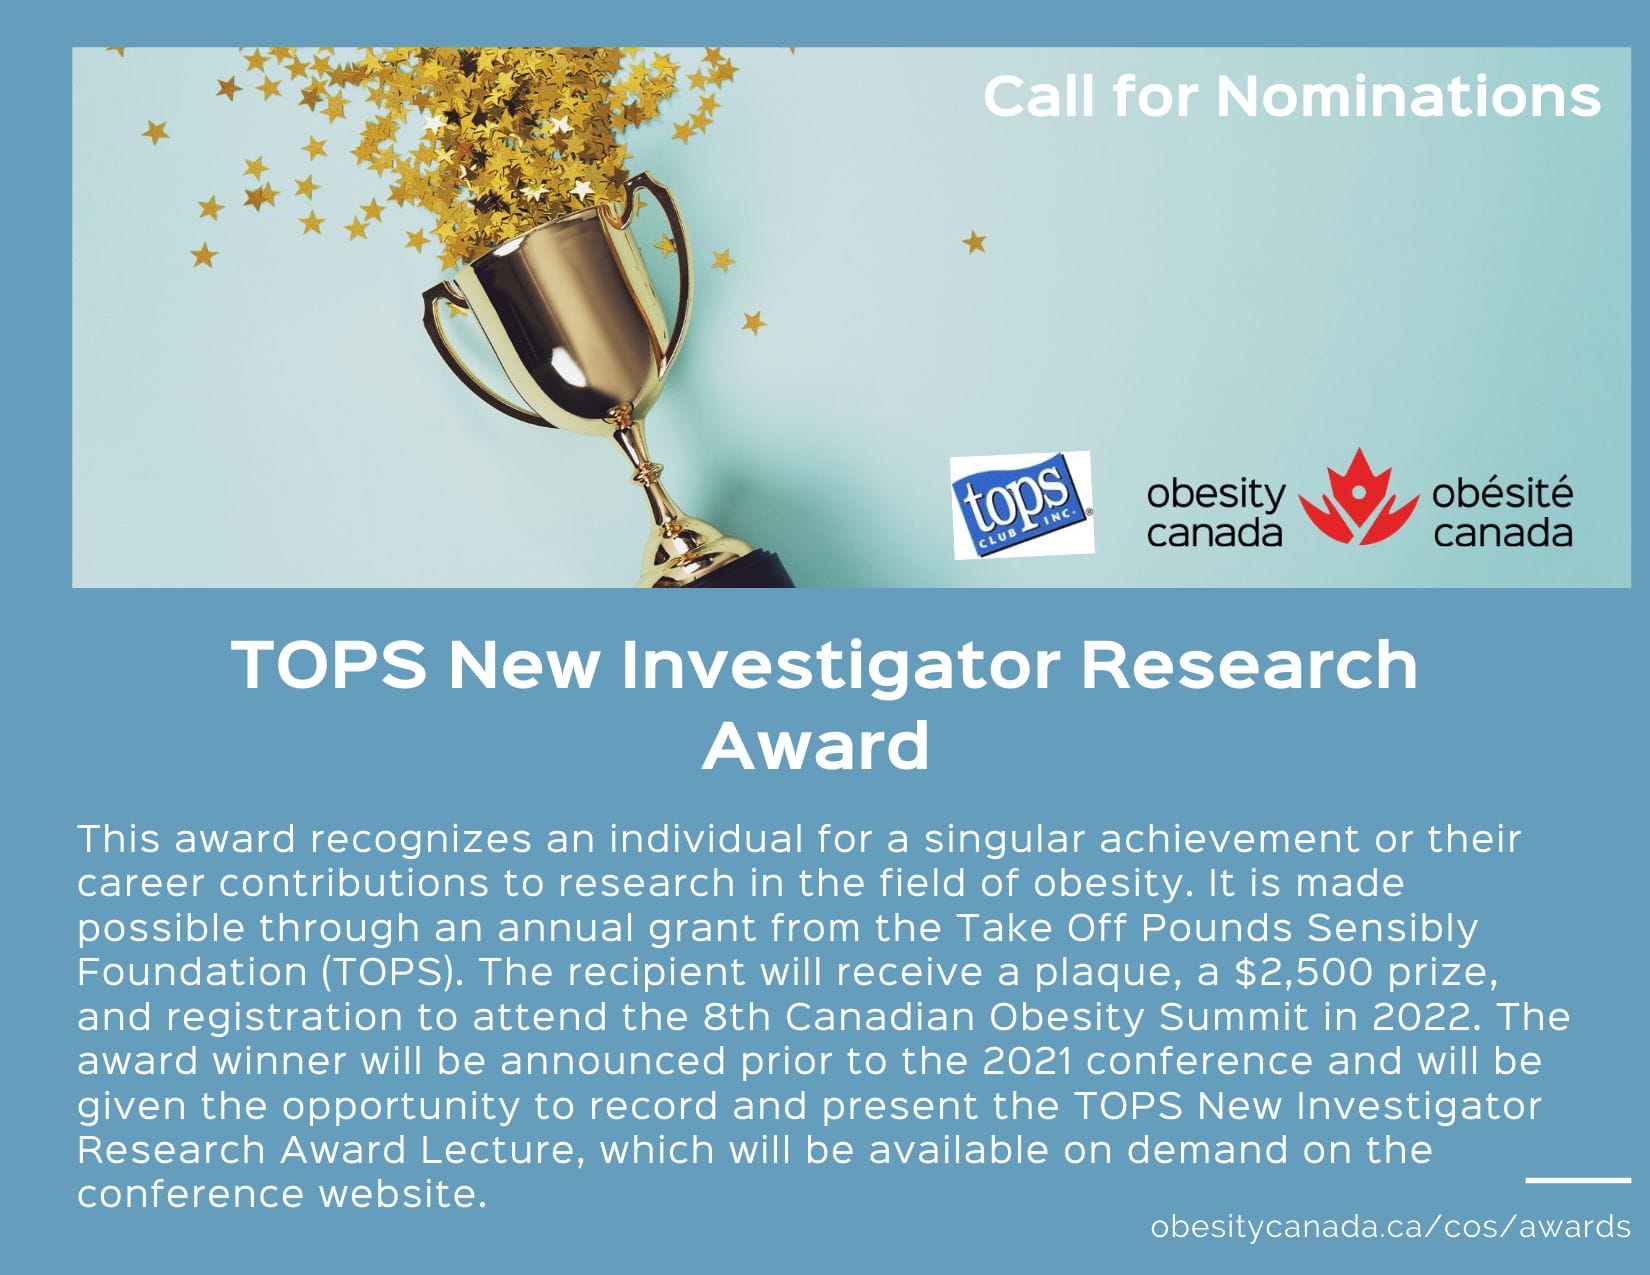 An advertisement for the tops new investigator award in obesity research, featuring a trophy and golden stars, with text detailing the award's purpose and nomination process.